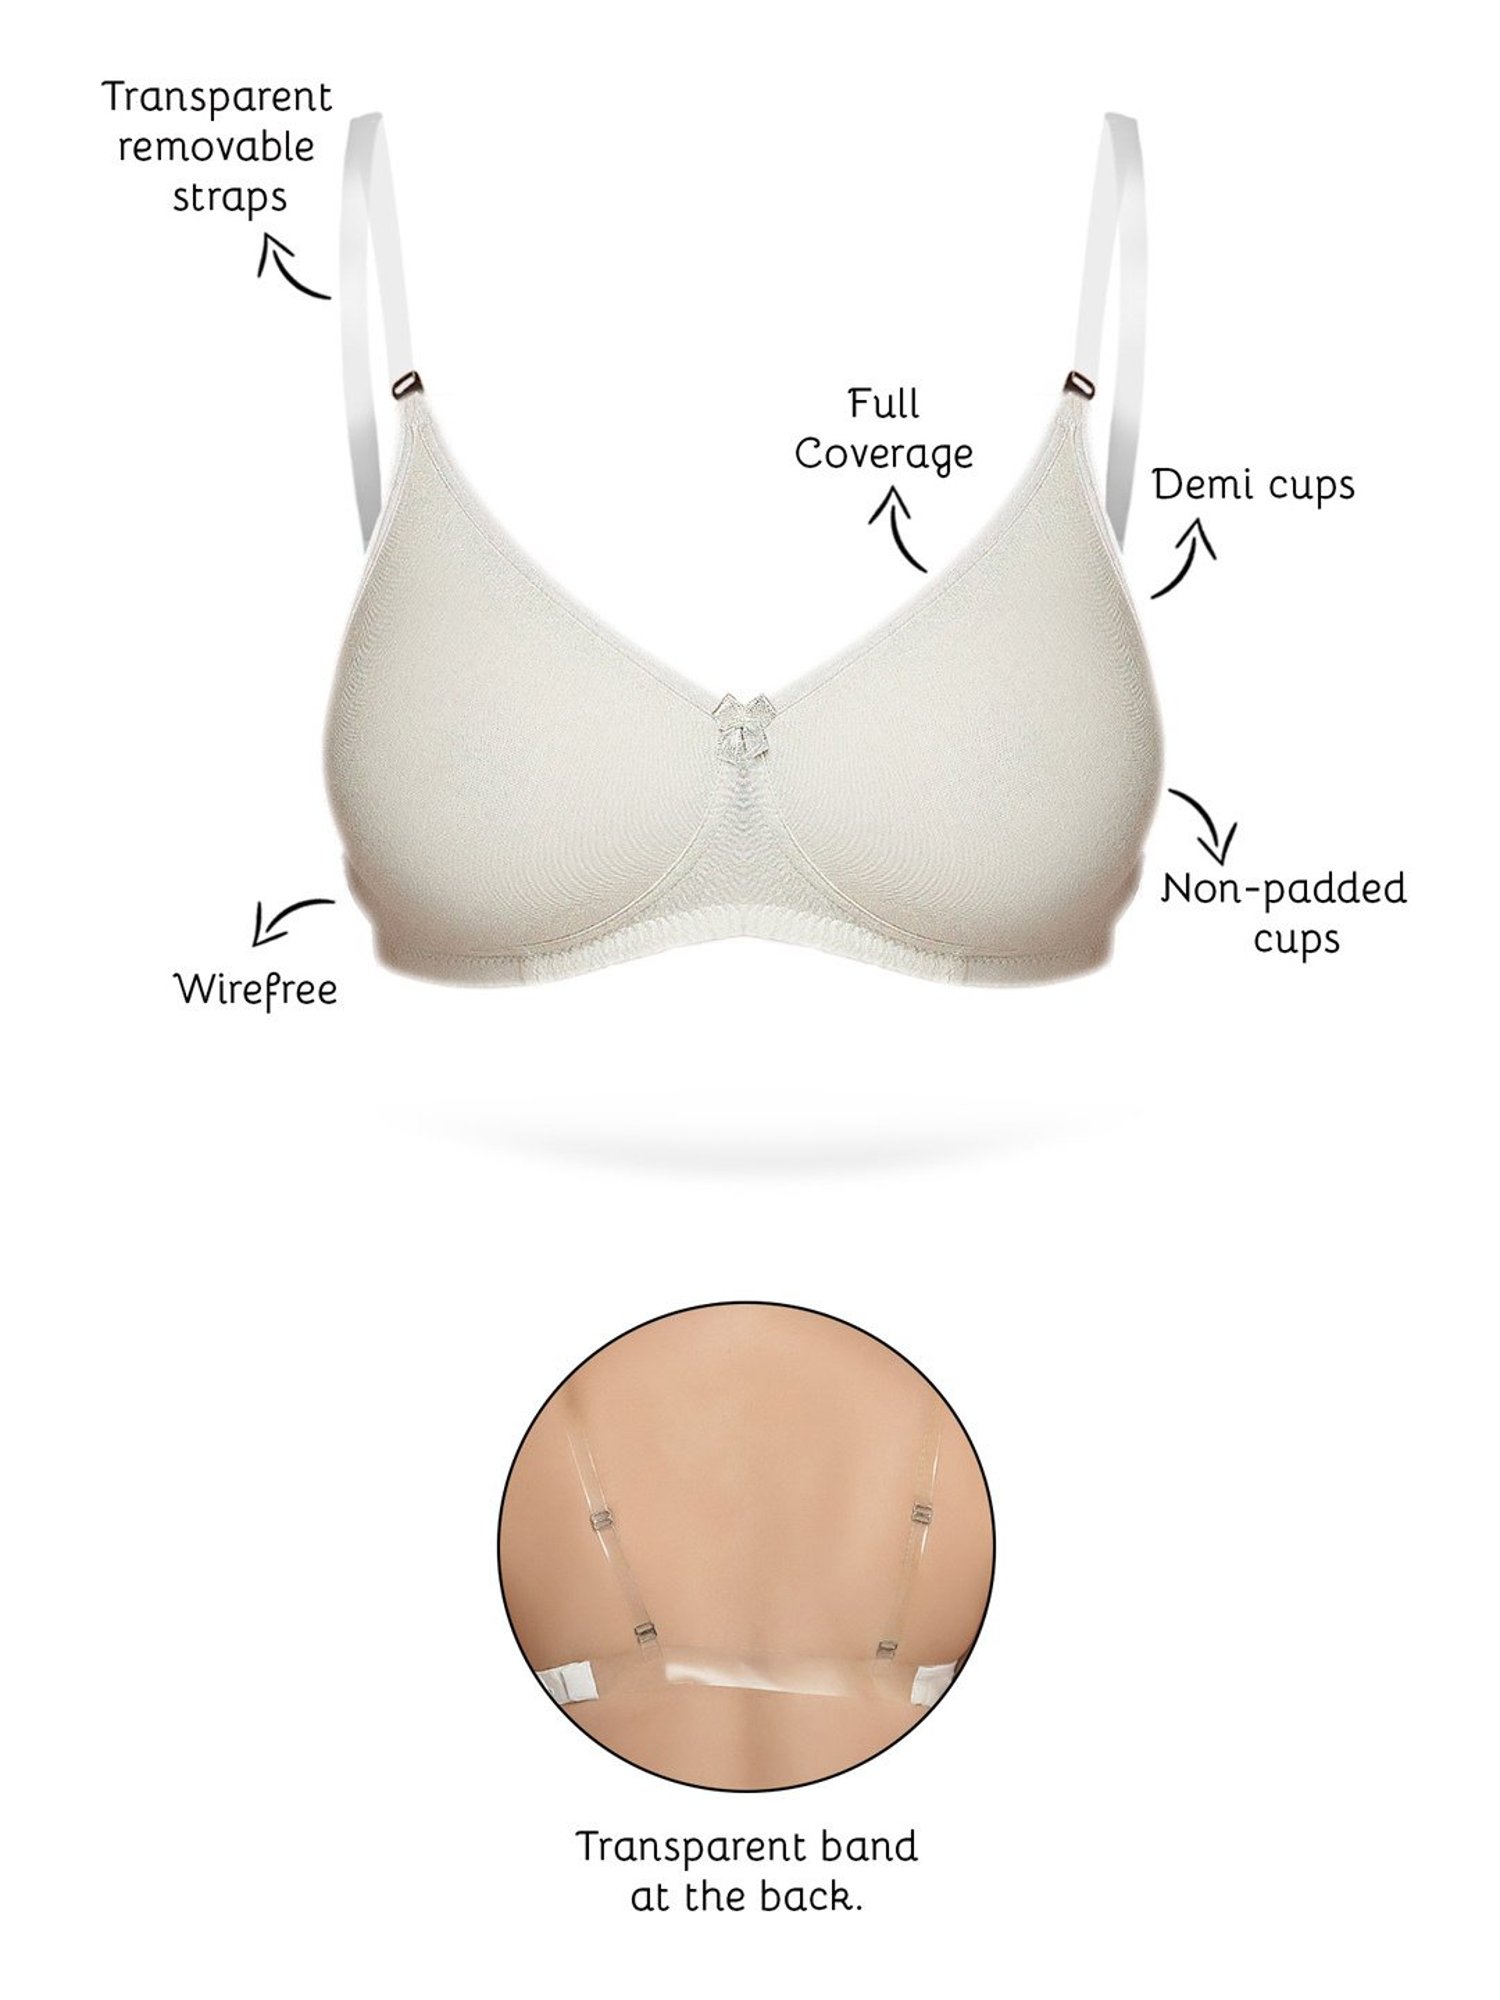 Wunderlove by Westside Cream Invisible Lace Bra